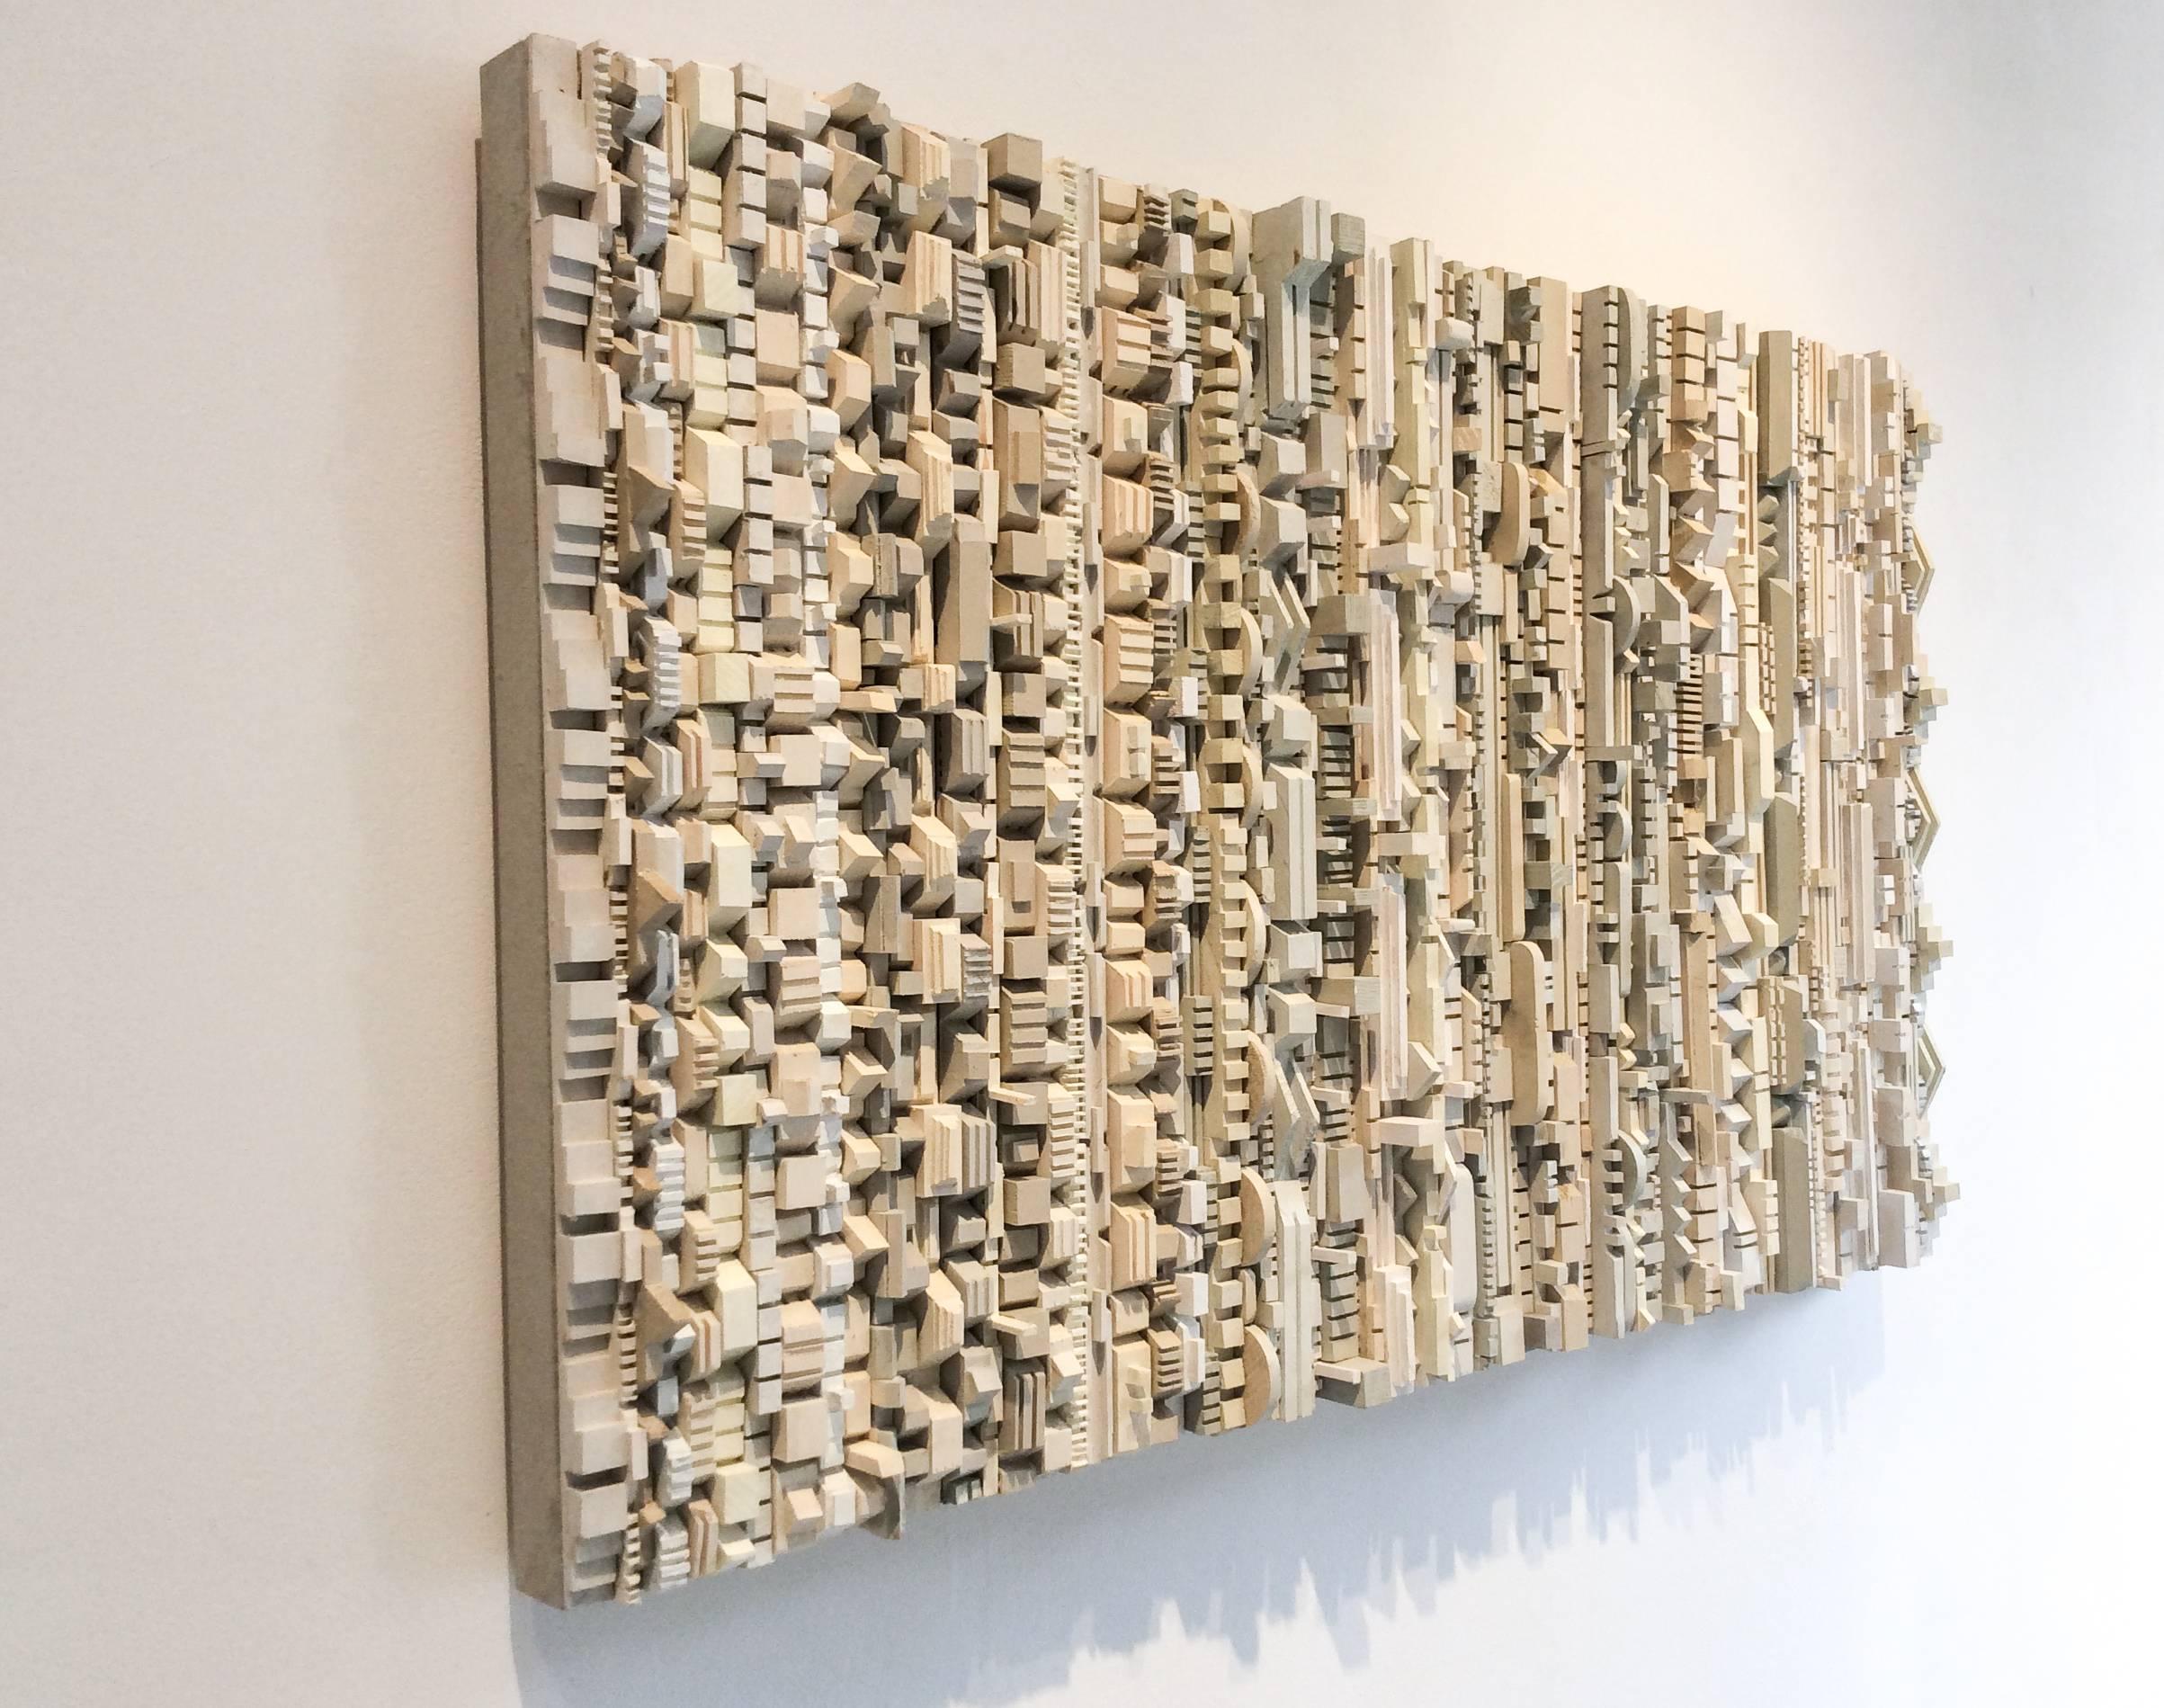 24 x 40  inches  acrylic, incised wooden wall sculpture

Stephen Walling’s painted wood constructions incorporate both a playful usage of color with geometry and a dialogue with nature using an oftentimes monochromatic color scheme. Walling